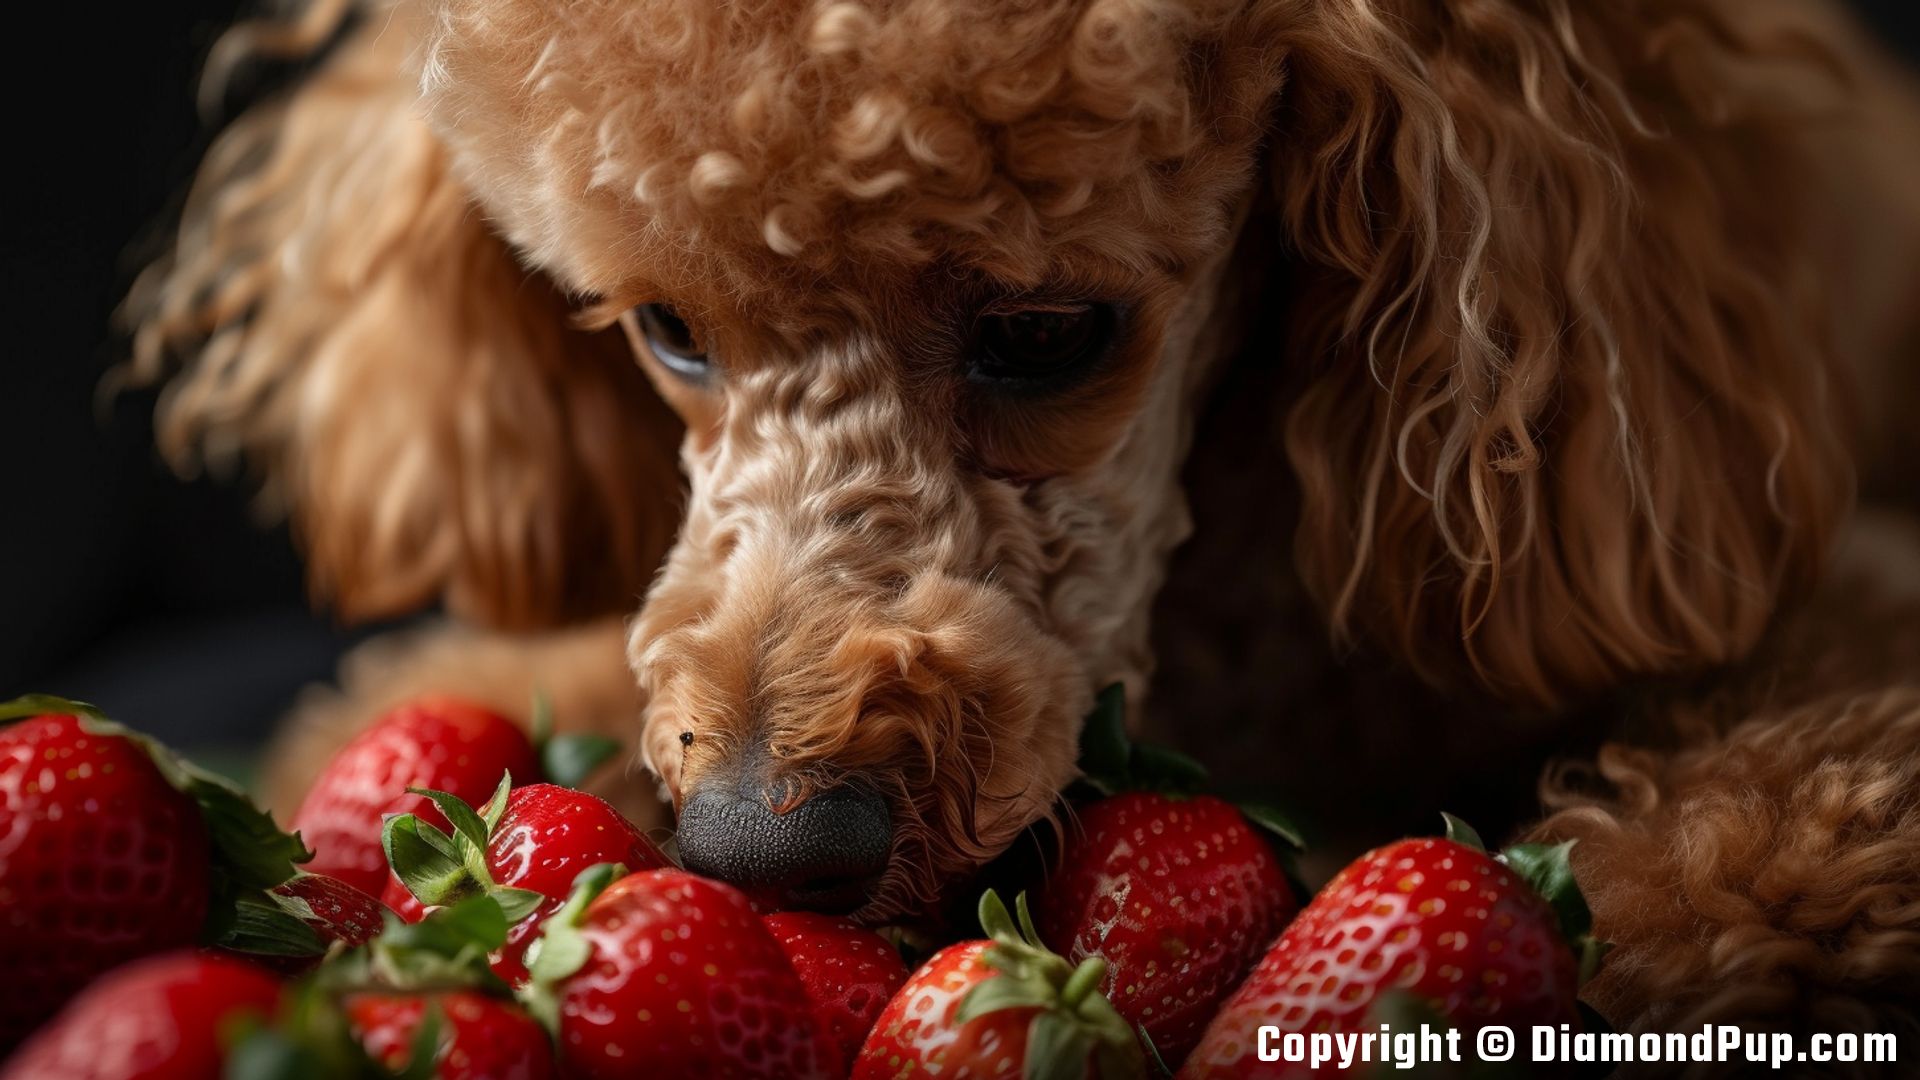 Image of a Playful Poodle Eating Strawberries